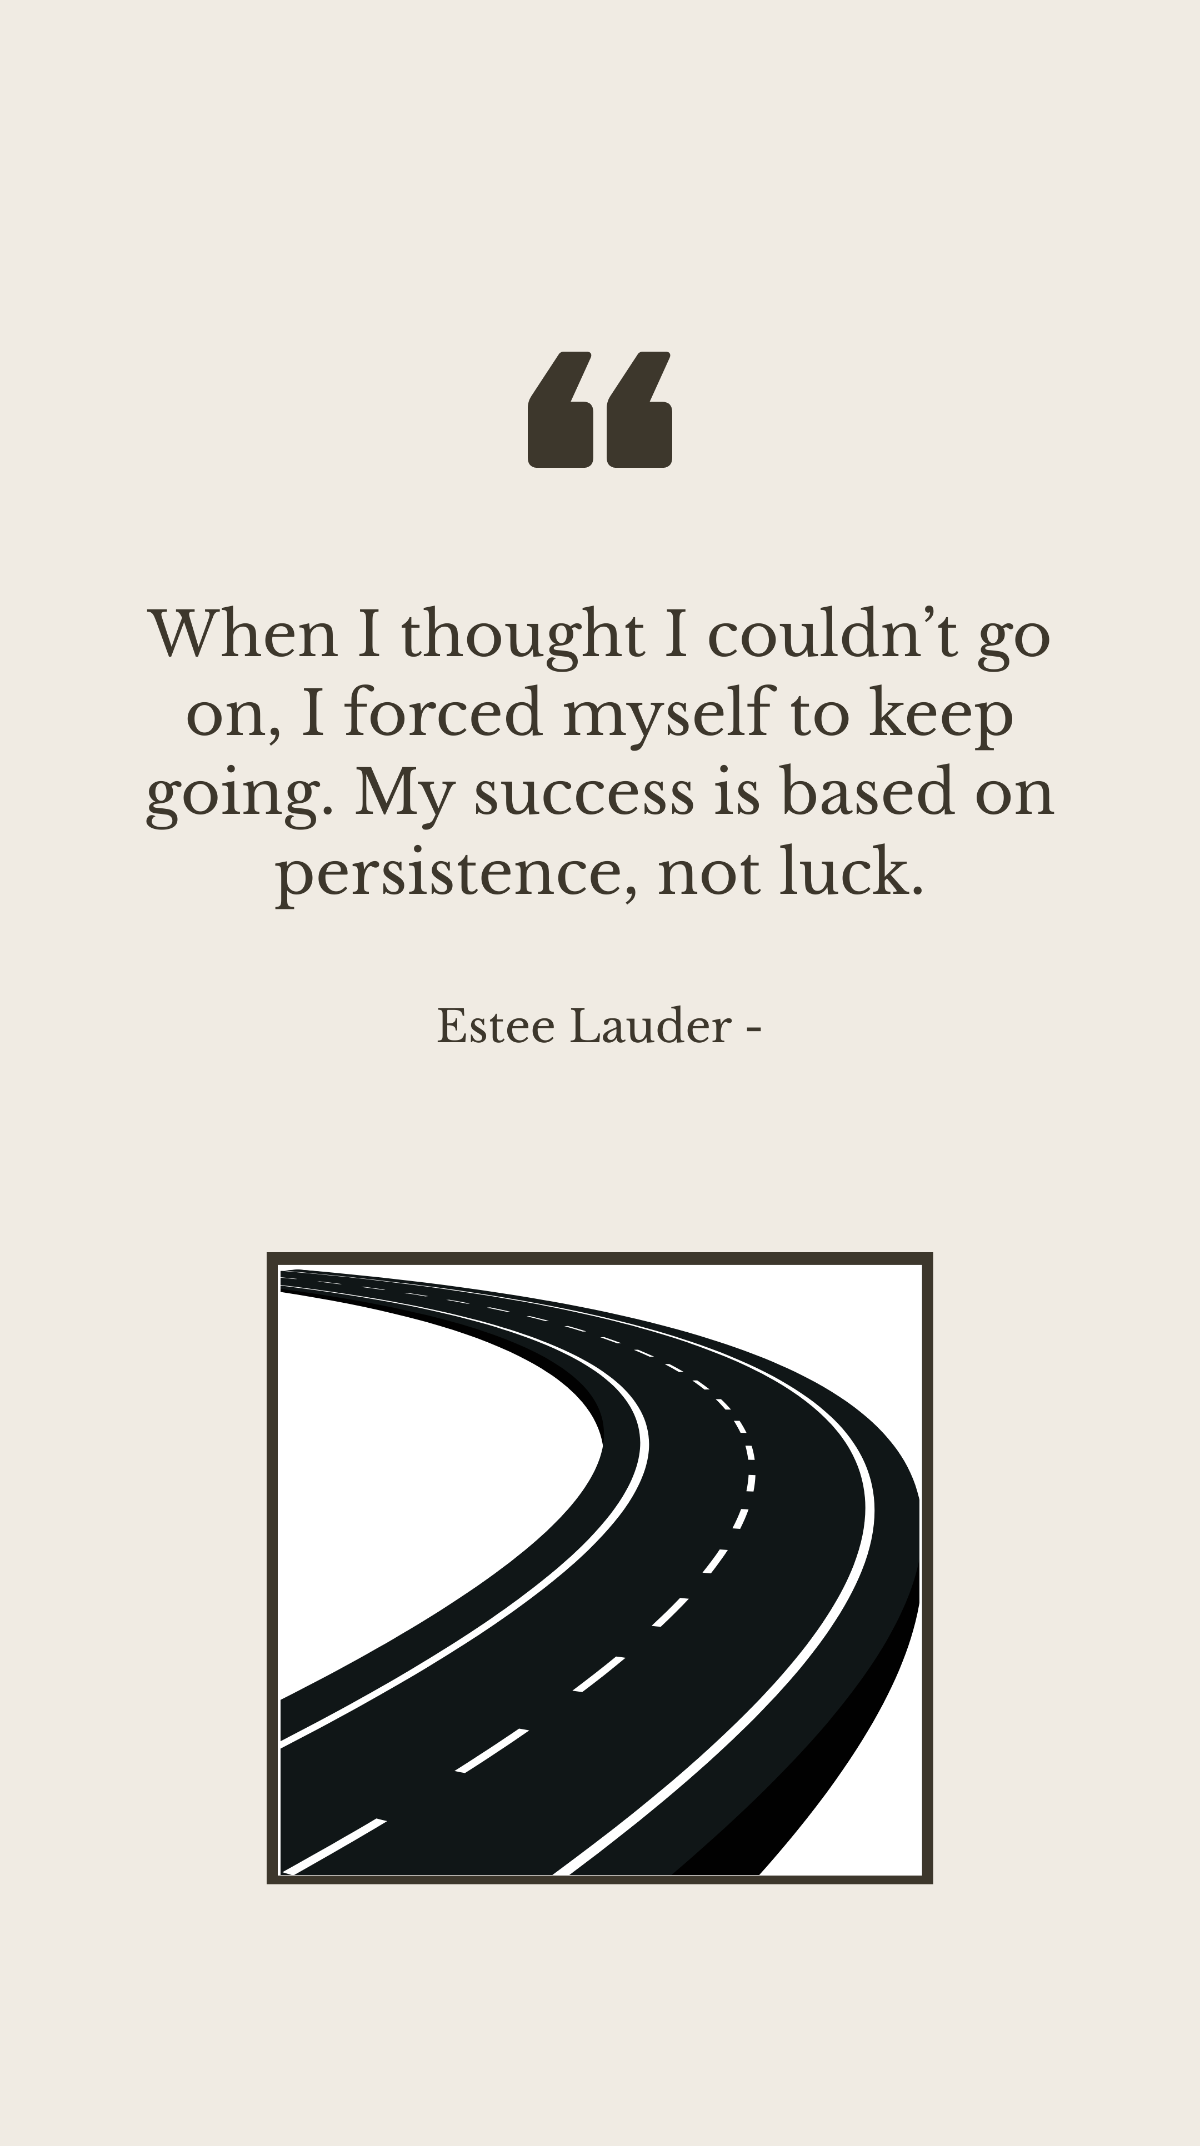 Estee Lauder - When I thought I couldn’t go on, I forced myself to keep going. My success is based on persistence, not luck. Template